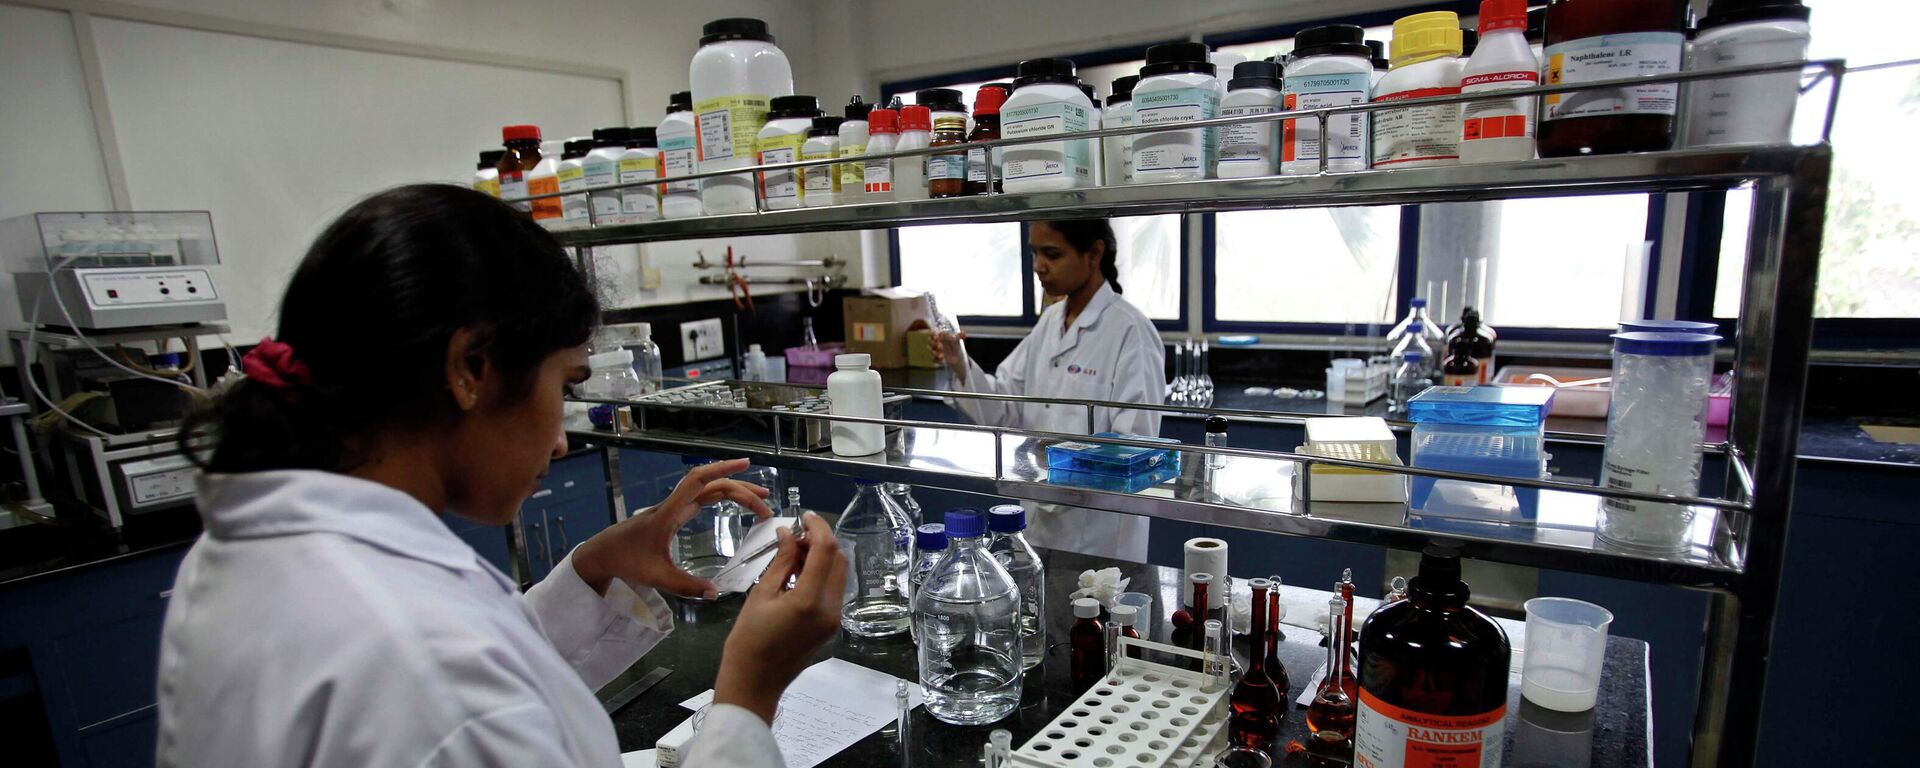 In this March 13, 2012 file photo, Indian scientists work inside a laboratory of the Research and Development Centre of Natco Pharma Ltd. in Hyderabad, India. - Sputnik International, 1920, 15.09.2022